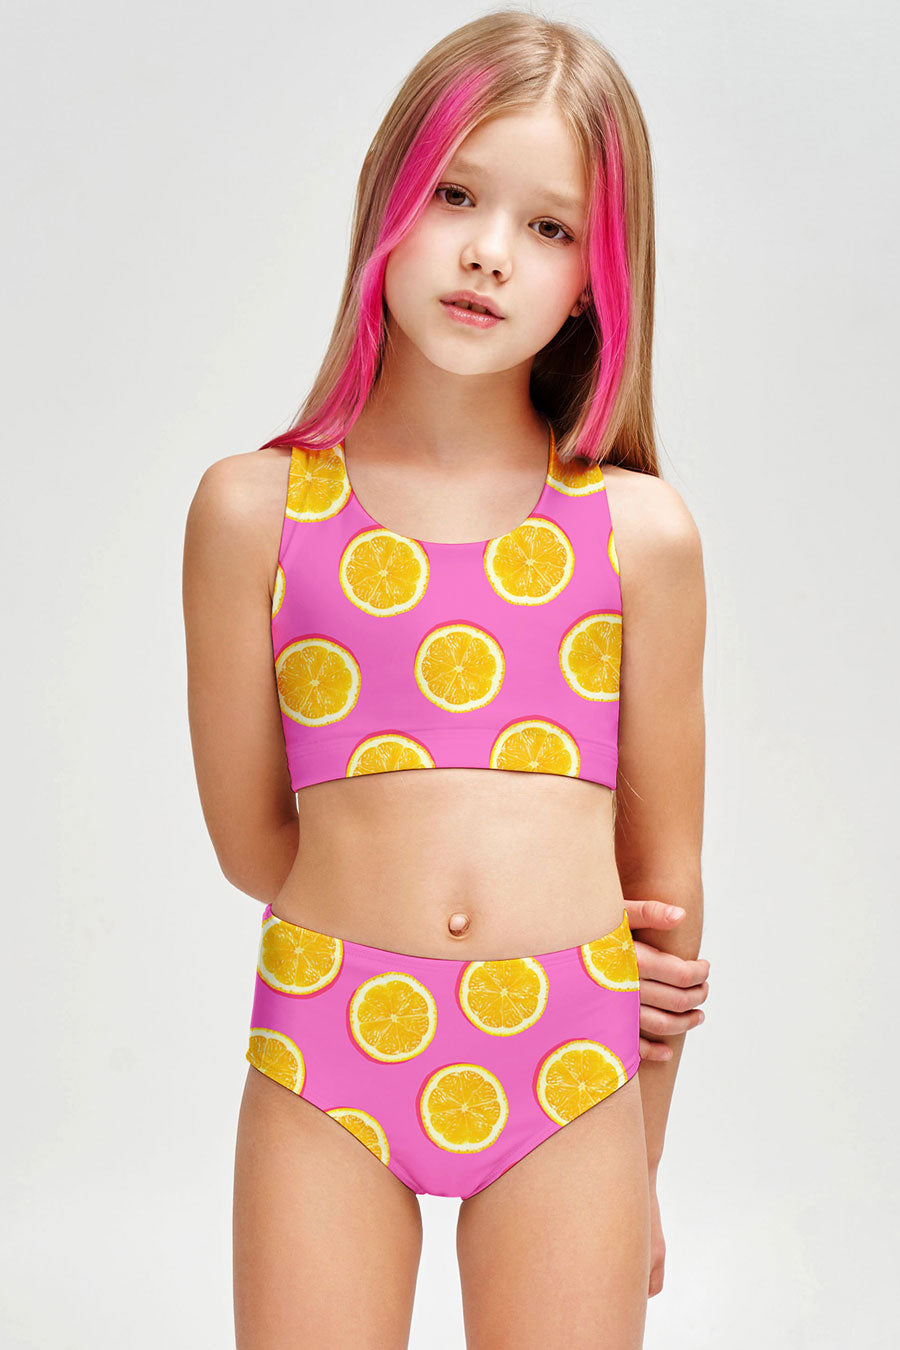 Tutti Frutti Claire Pink Two-Piece Swimsuit Sporty Swim Set - Girls - Pineapple Clothing